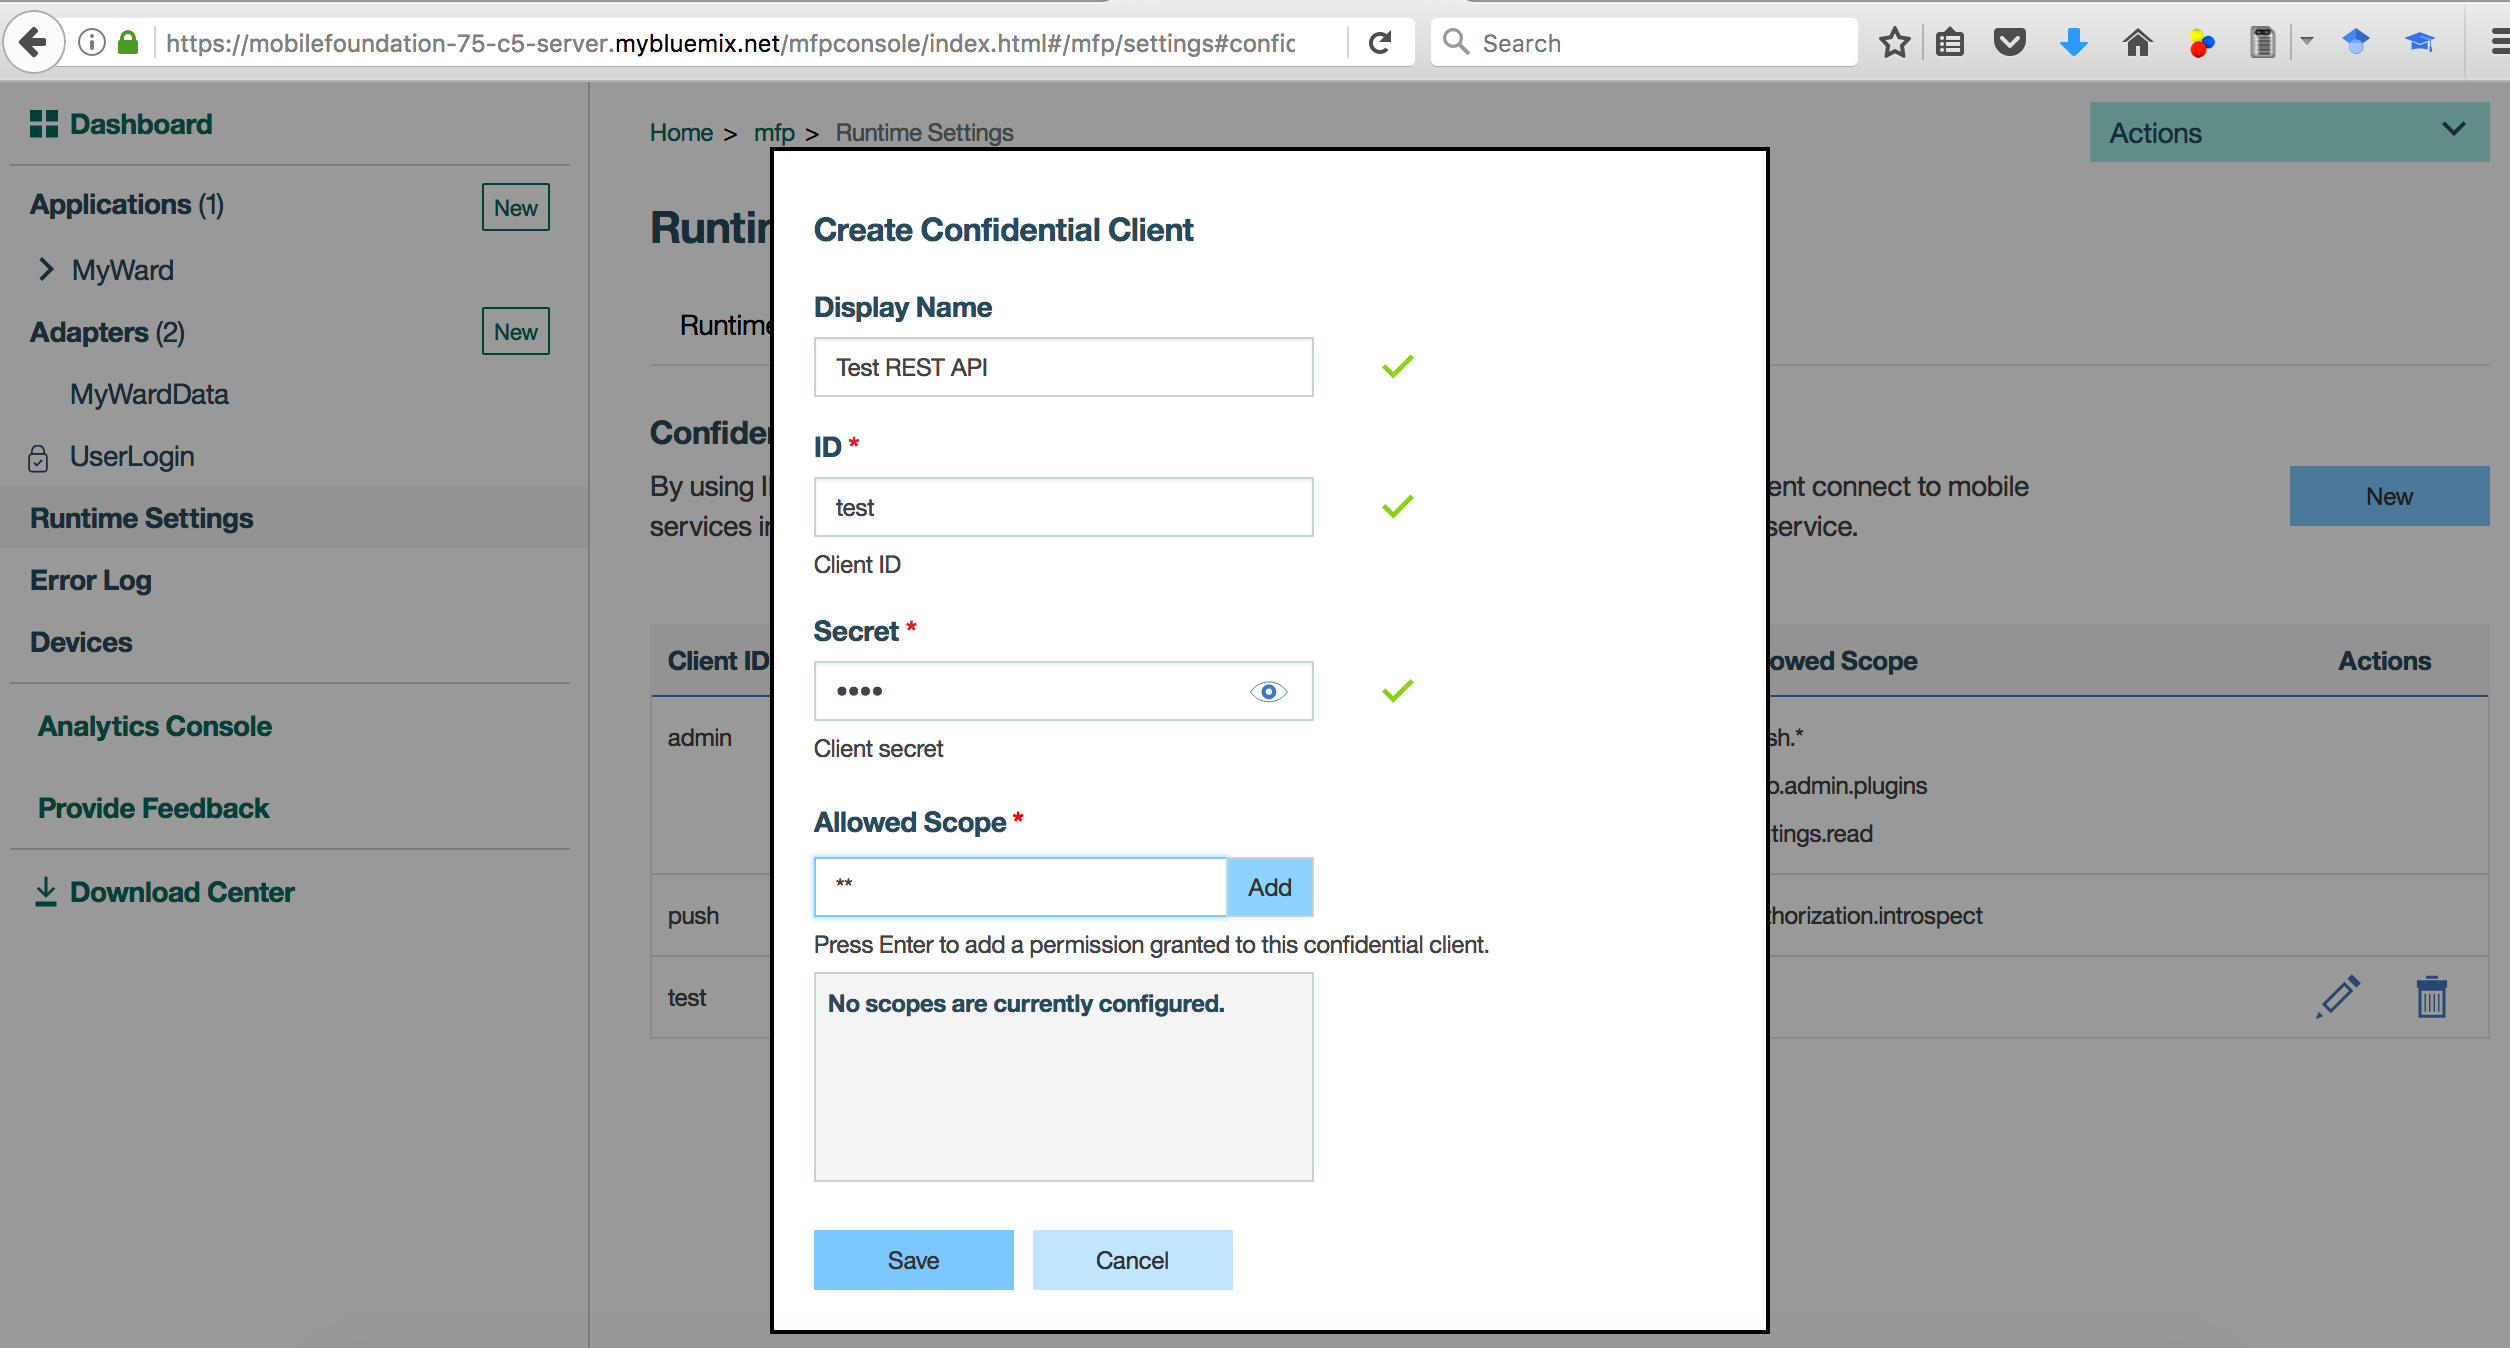 MFP - Create Confidential Client to test Adapter REST APIs